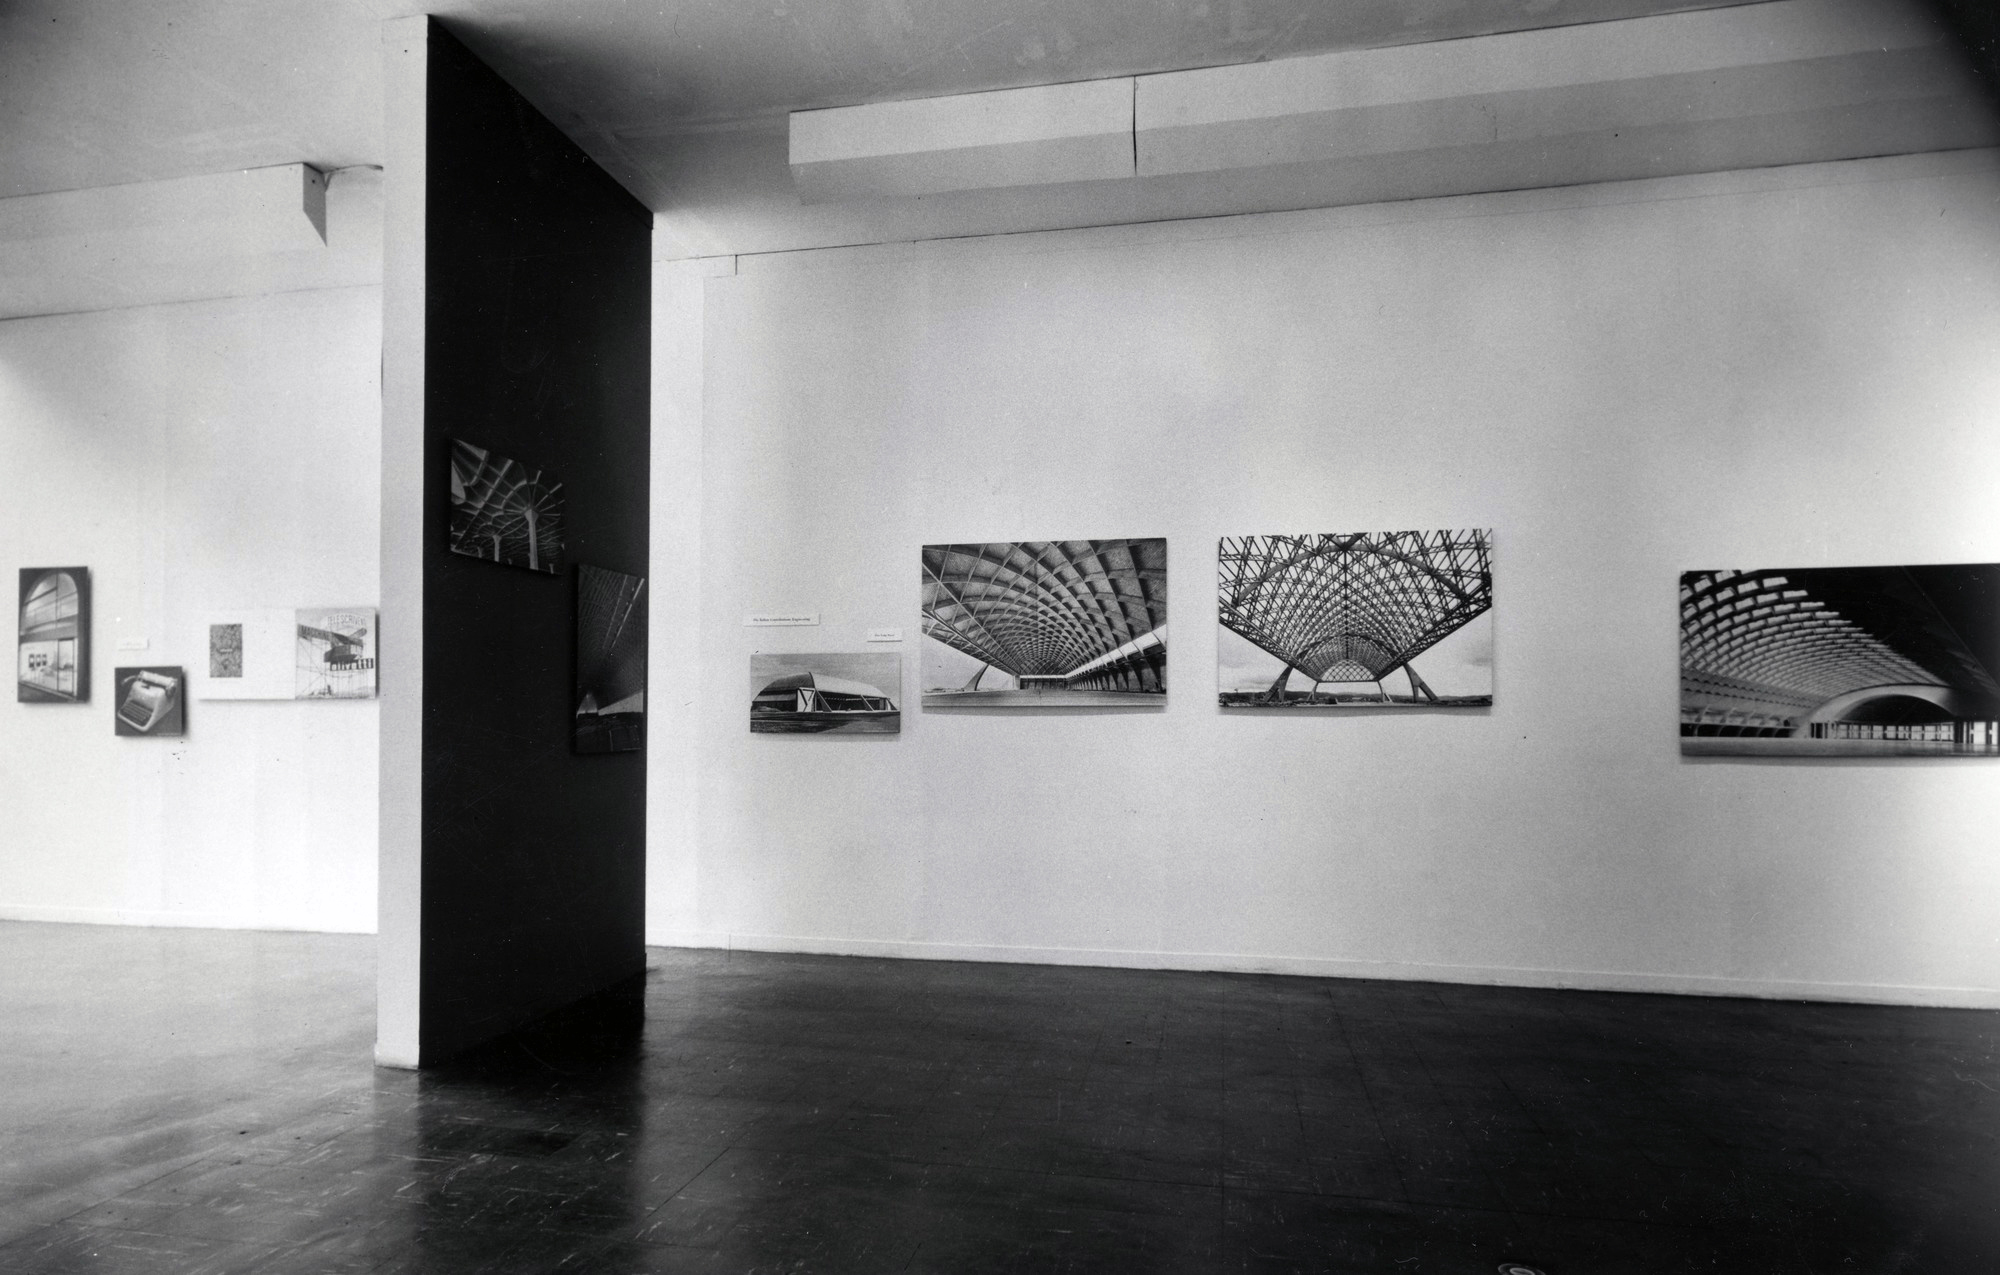 Installation view at the New York opening, Section "The Italian Contributions. Engineering: Pier Luigi Nervi"